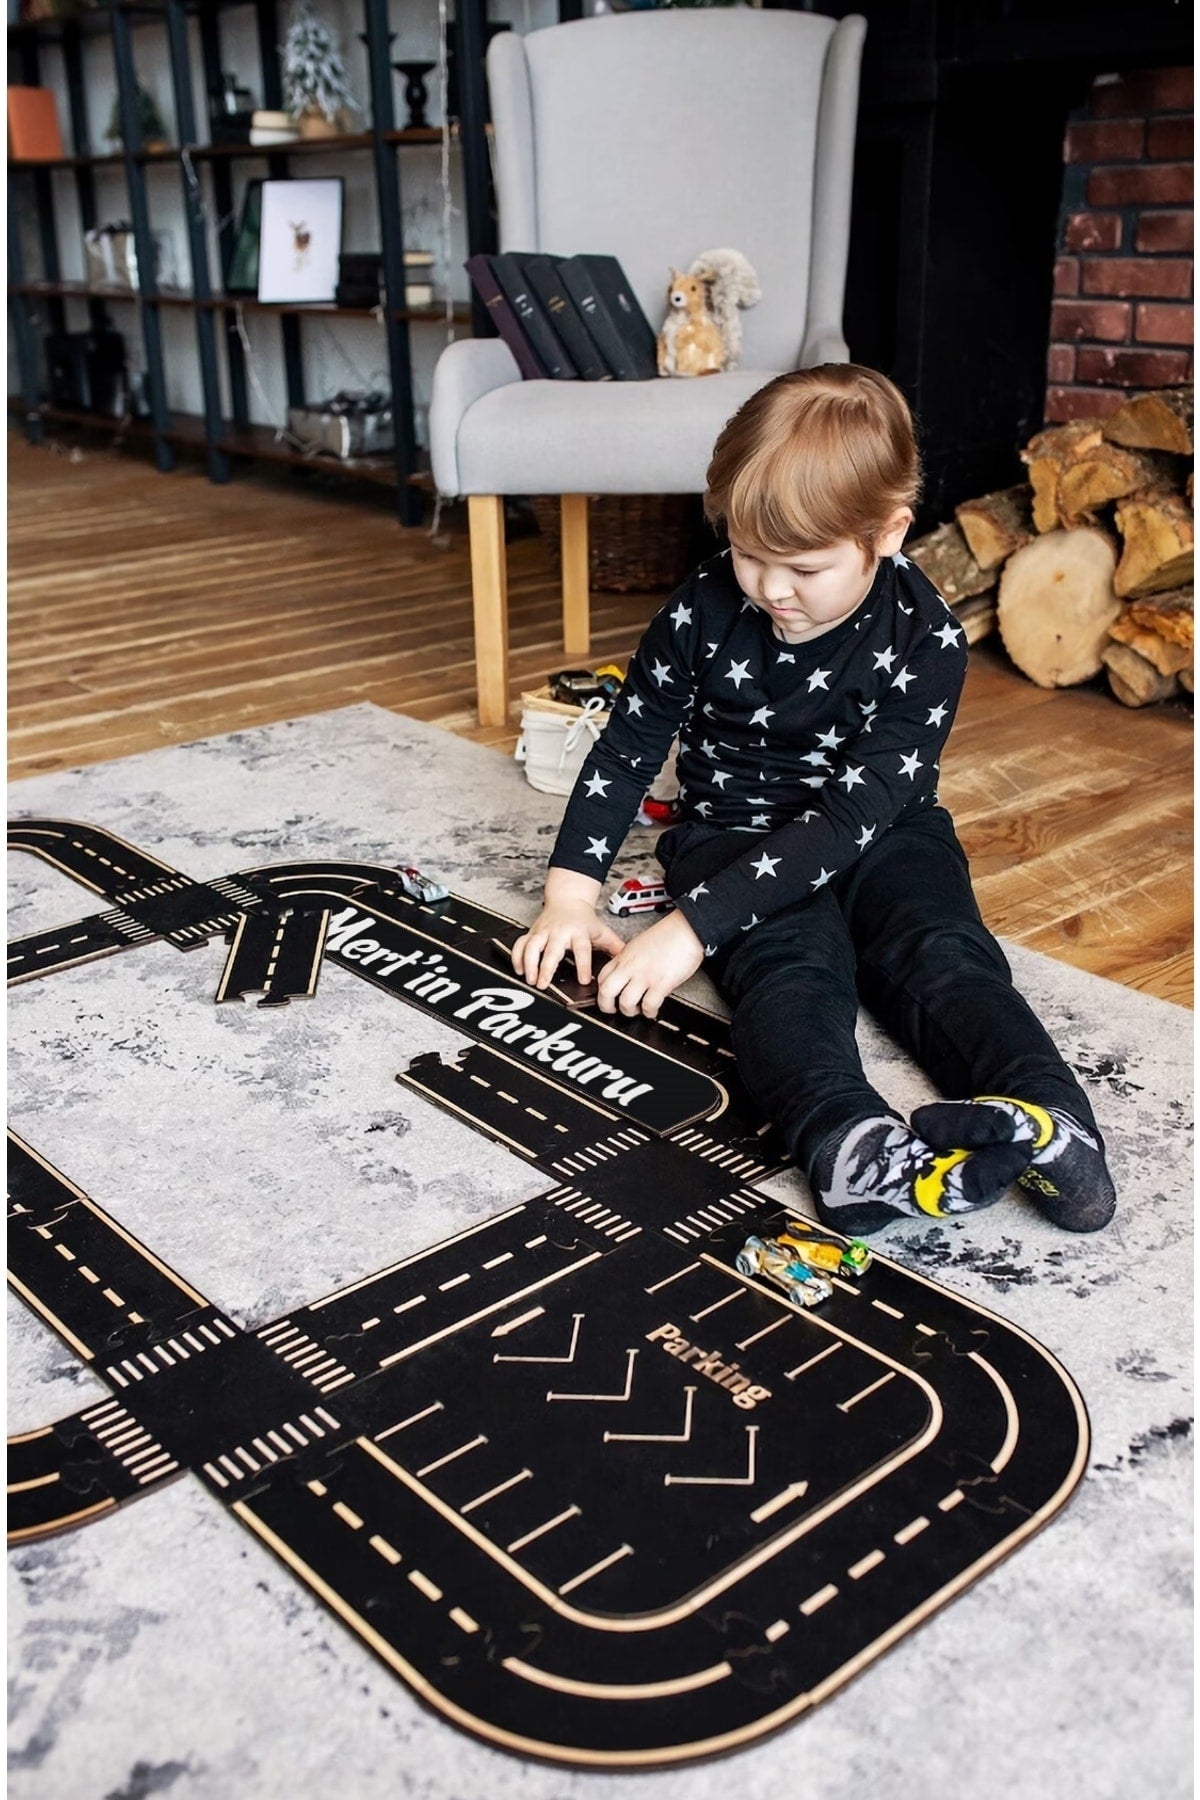 Toy Vehicle Track (large) -Educational And Fun Road Construction Wooden Toy - Highway Puzzle